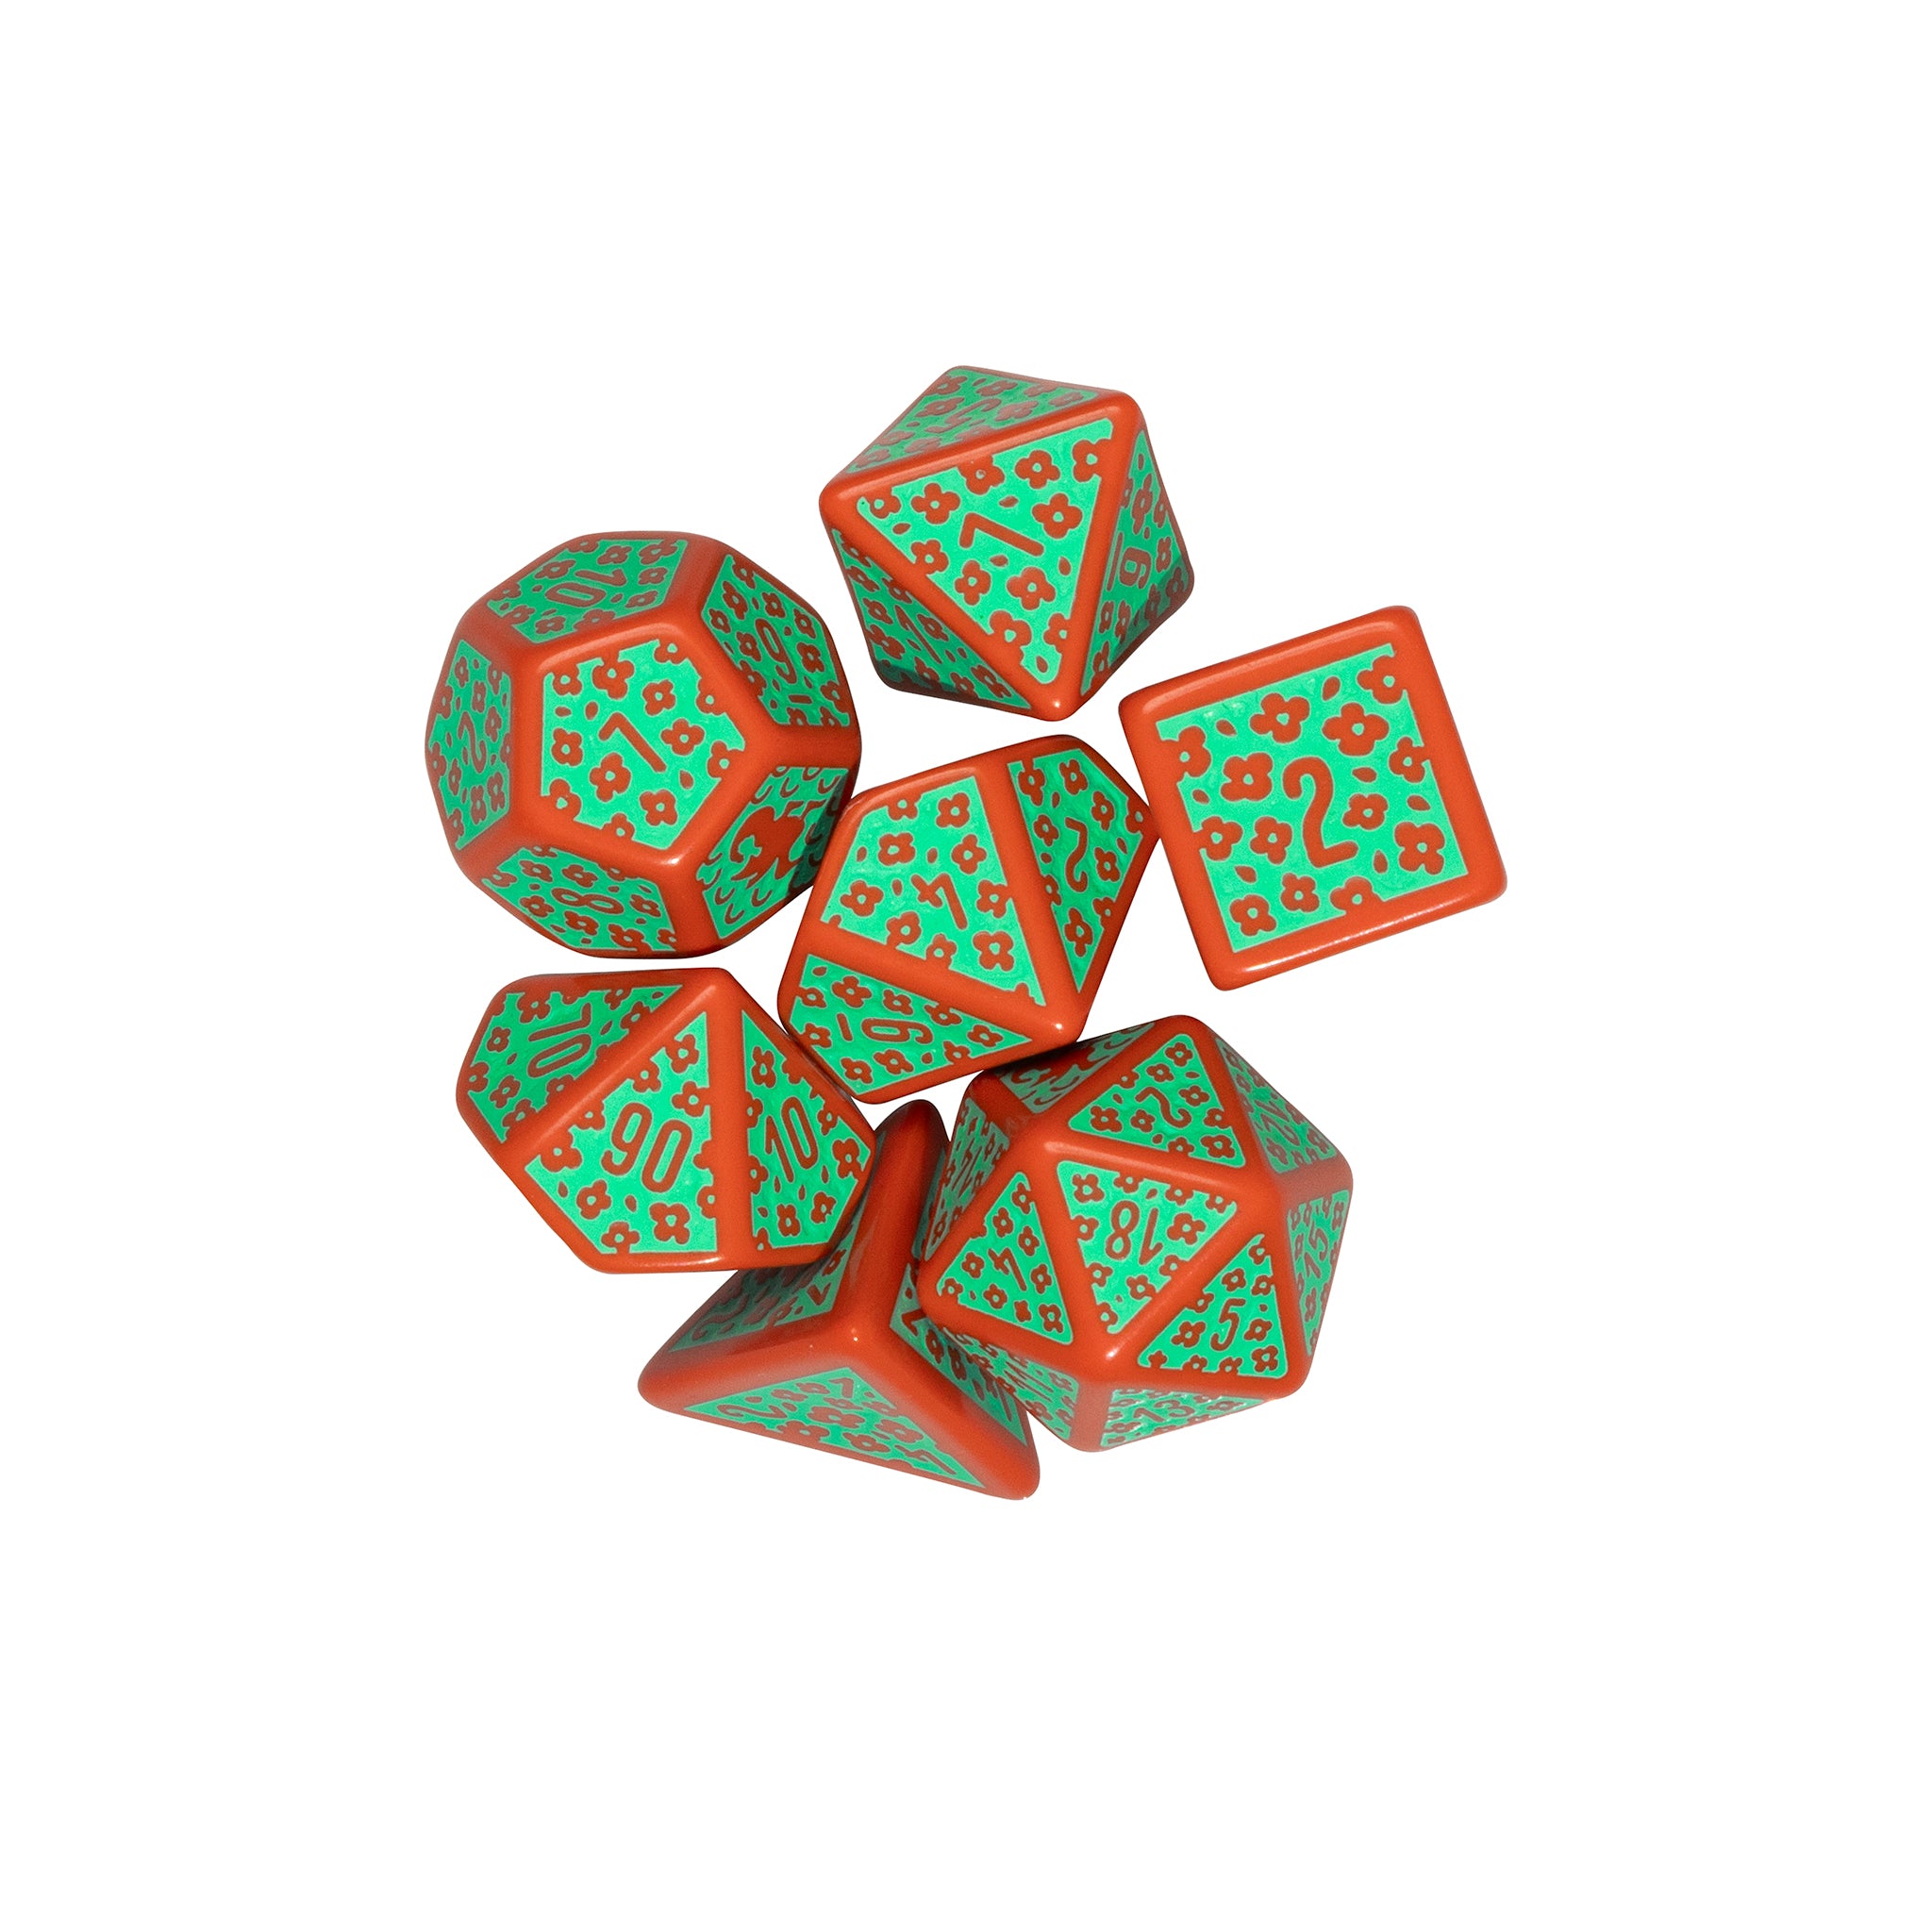 green and red dice playing dice laid flat carlin brothers